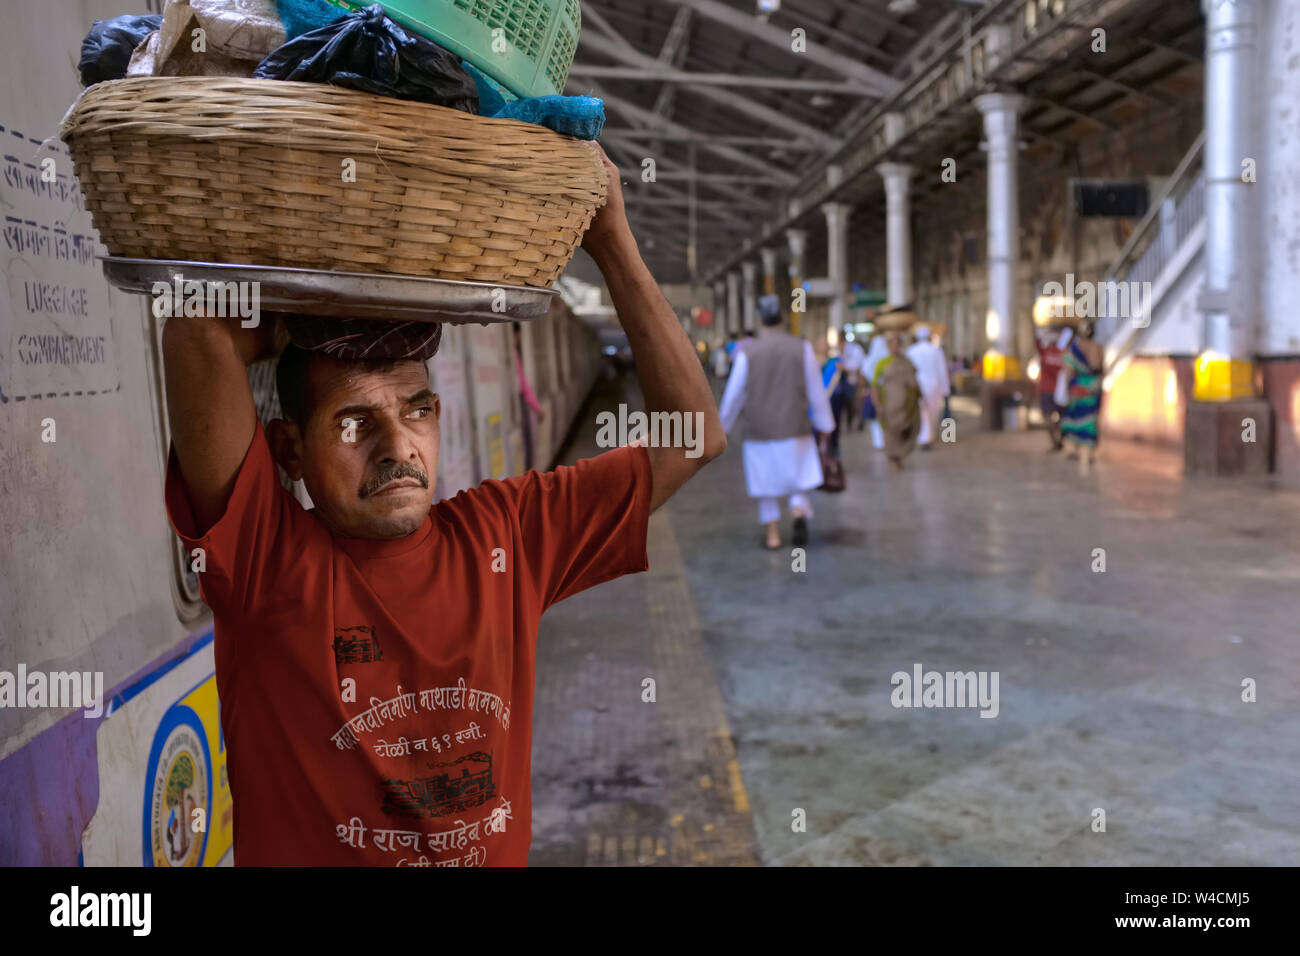 A porter at Chhatrapati Shivaji Maharaj Terminus in Mumbai, India, waiting for a local train to deliver his goods, looking distressed and anguished Stock Photo